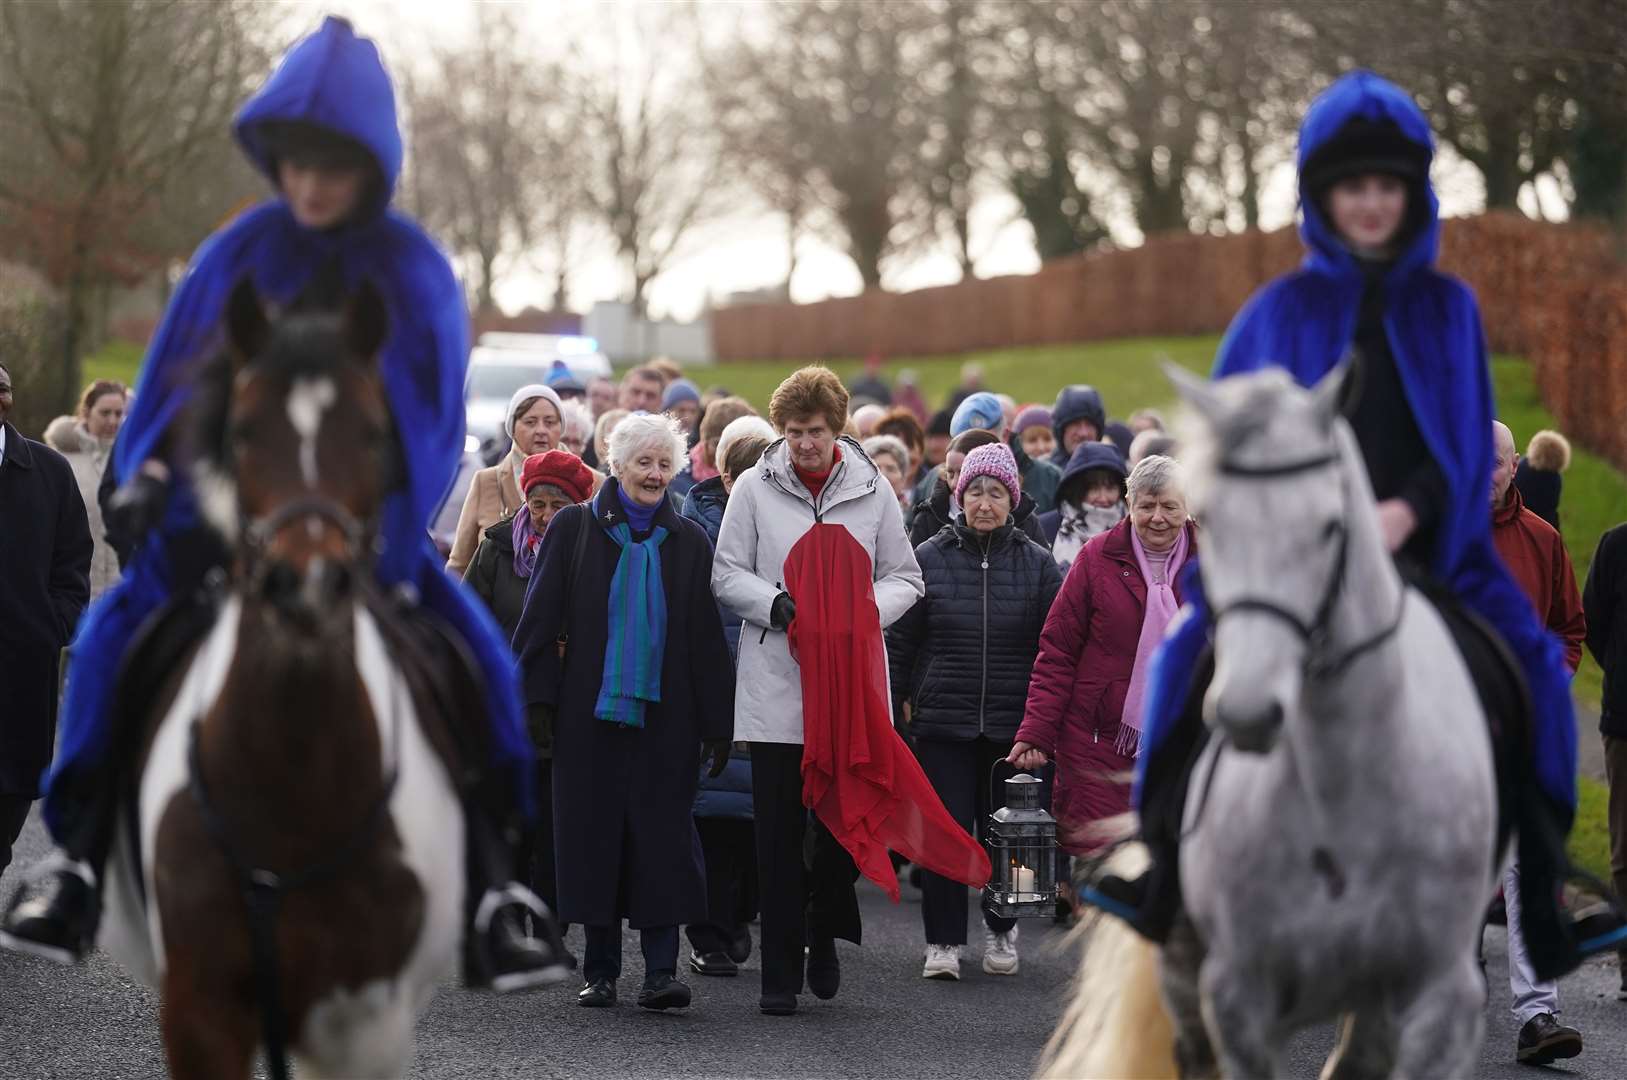 Theresa Kilmurray, of the Brigidine Congregational Leadership Team (centre), along with Sister Rita Minahen (left), carries the relic of St Brigid during the procession (Brian Lawless/PA)